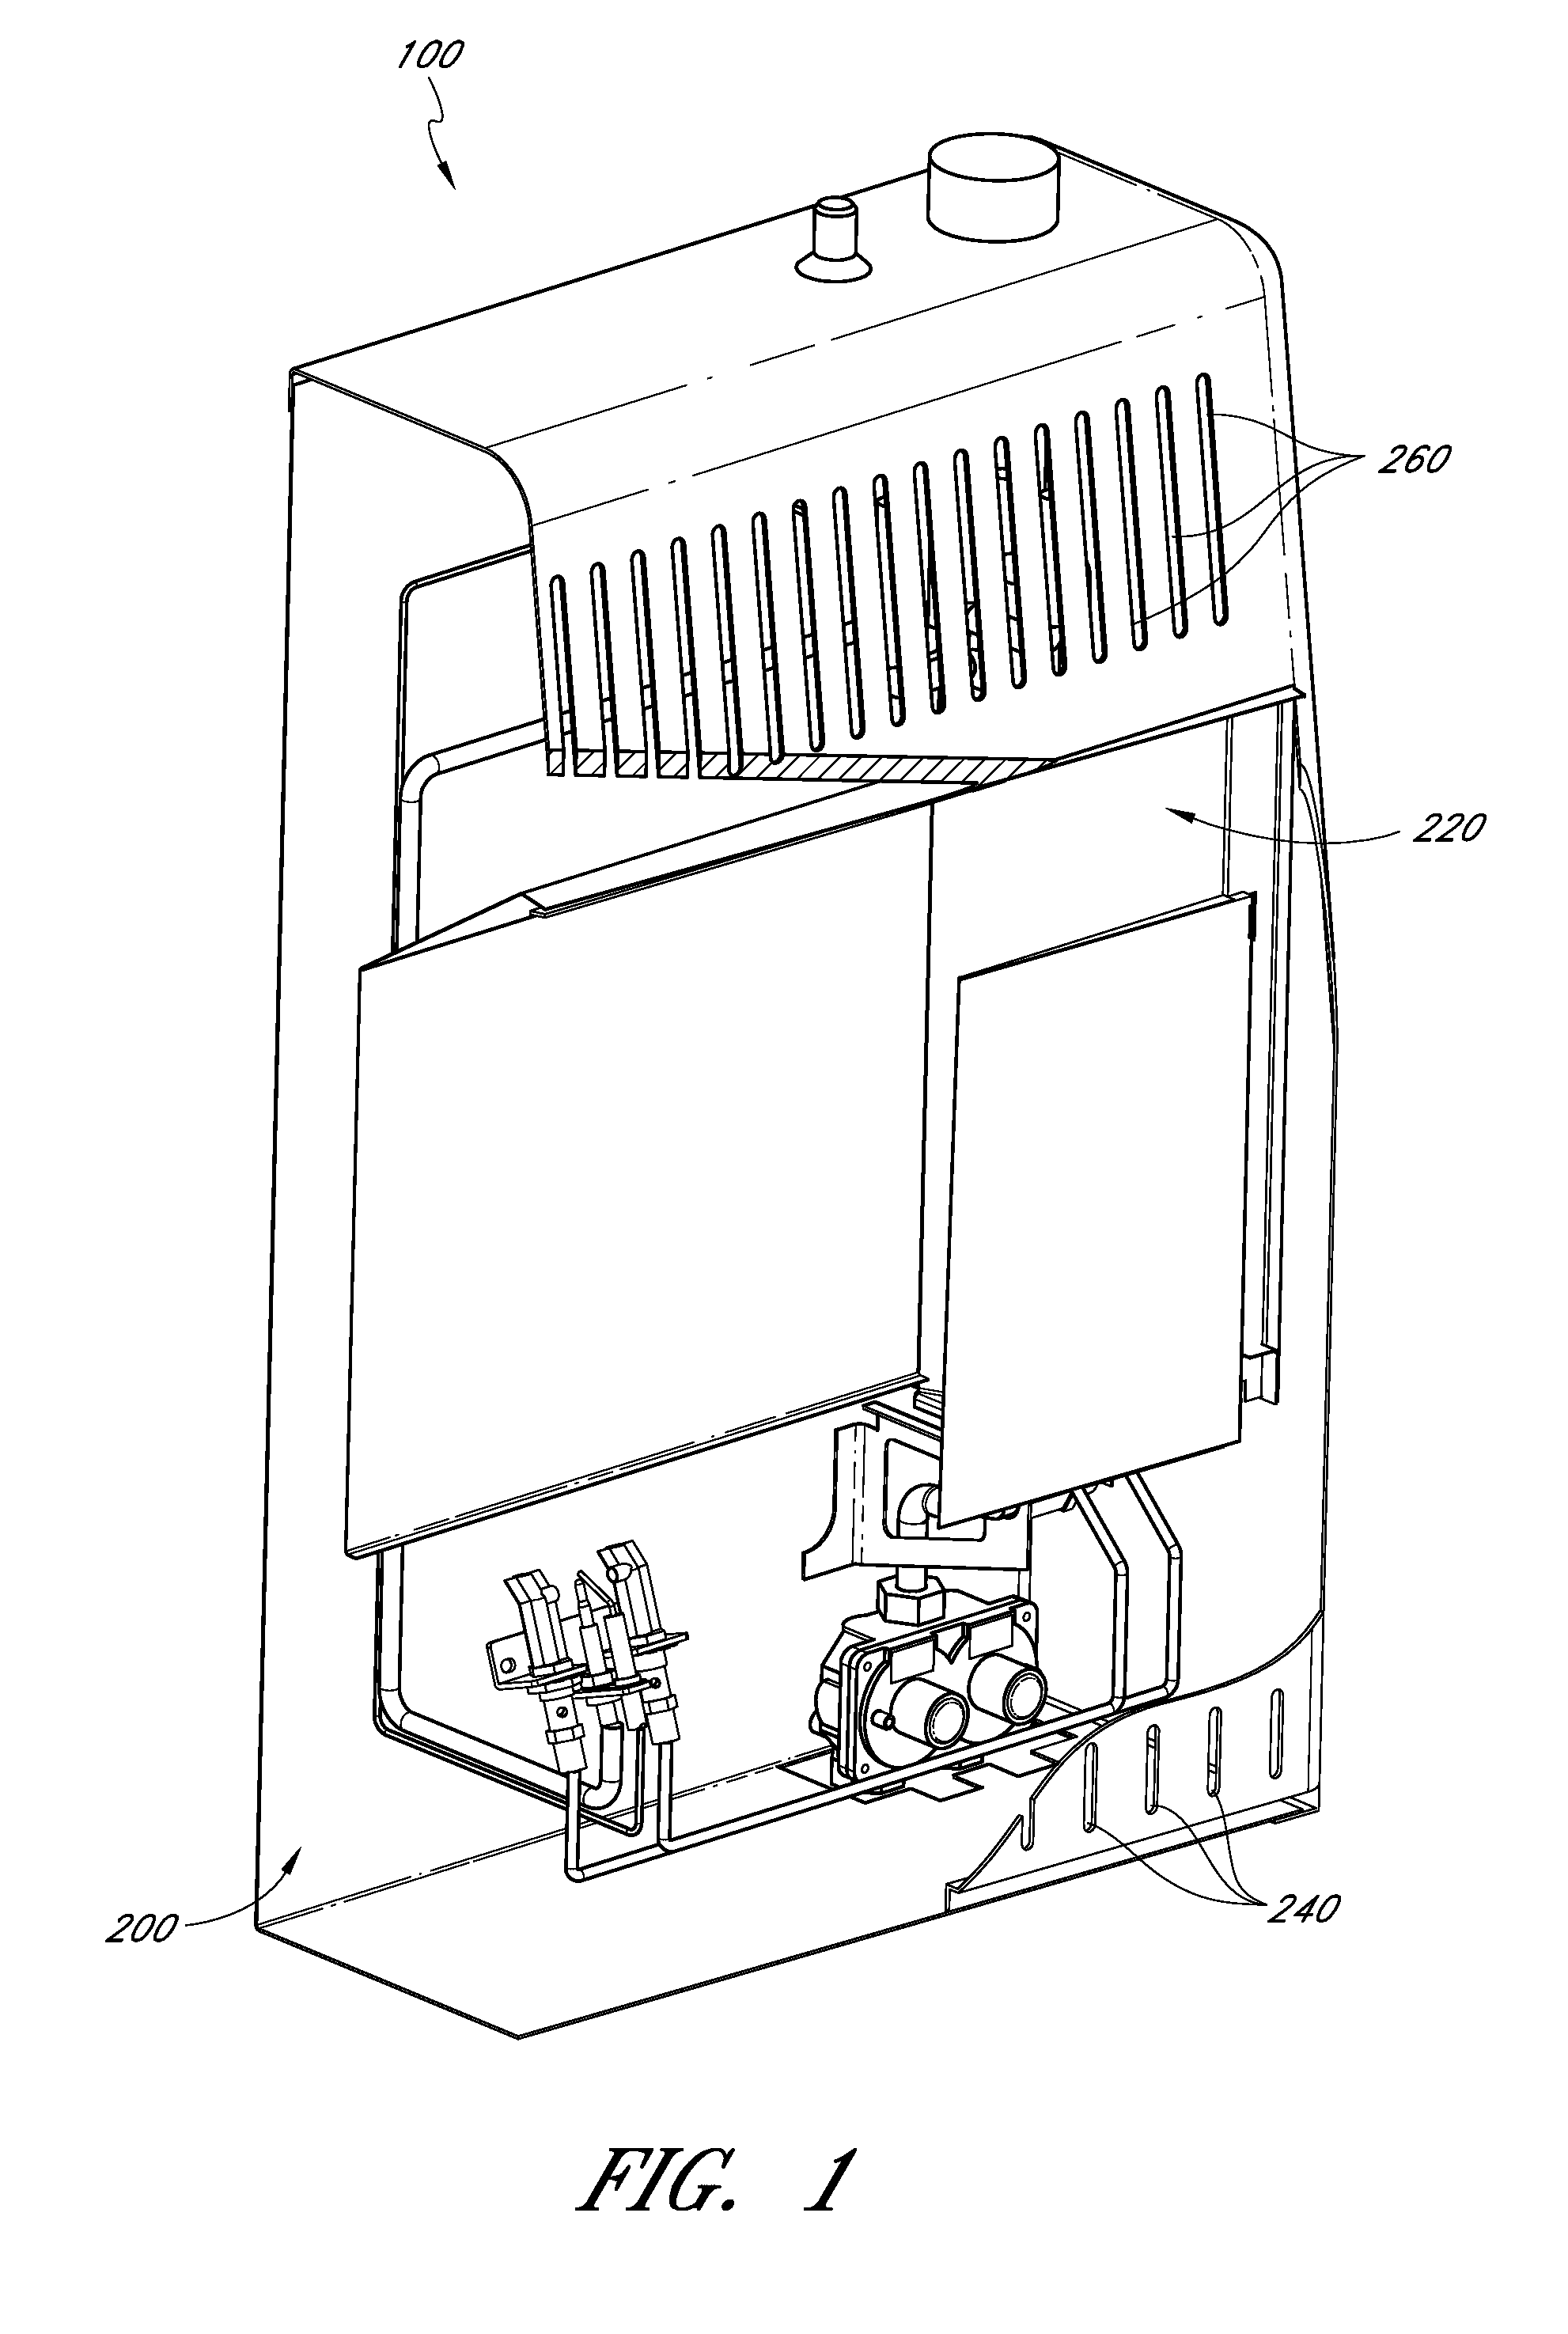 Dual fuel heating source with nozzle